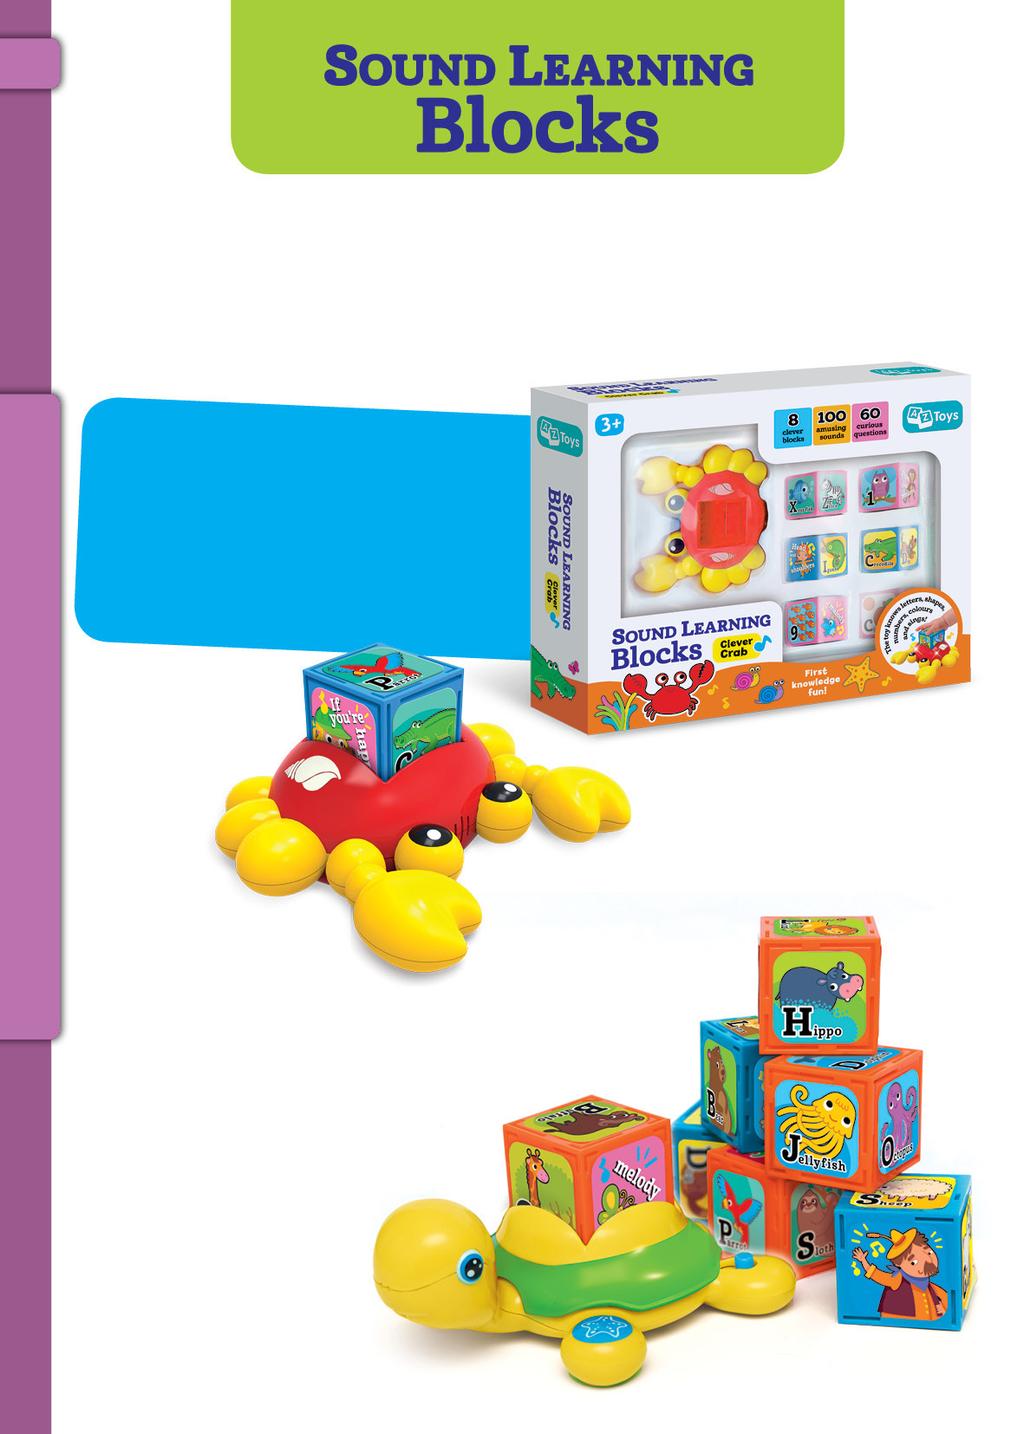 46 CLEVER CRAB REF. AZT-55-A-001 8 clever blocks 100 amusing sounds 60 curious questions ACTIVE LEARNING TOYS Meet a brand new toy Clever Crab Musical Blocks!